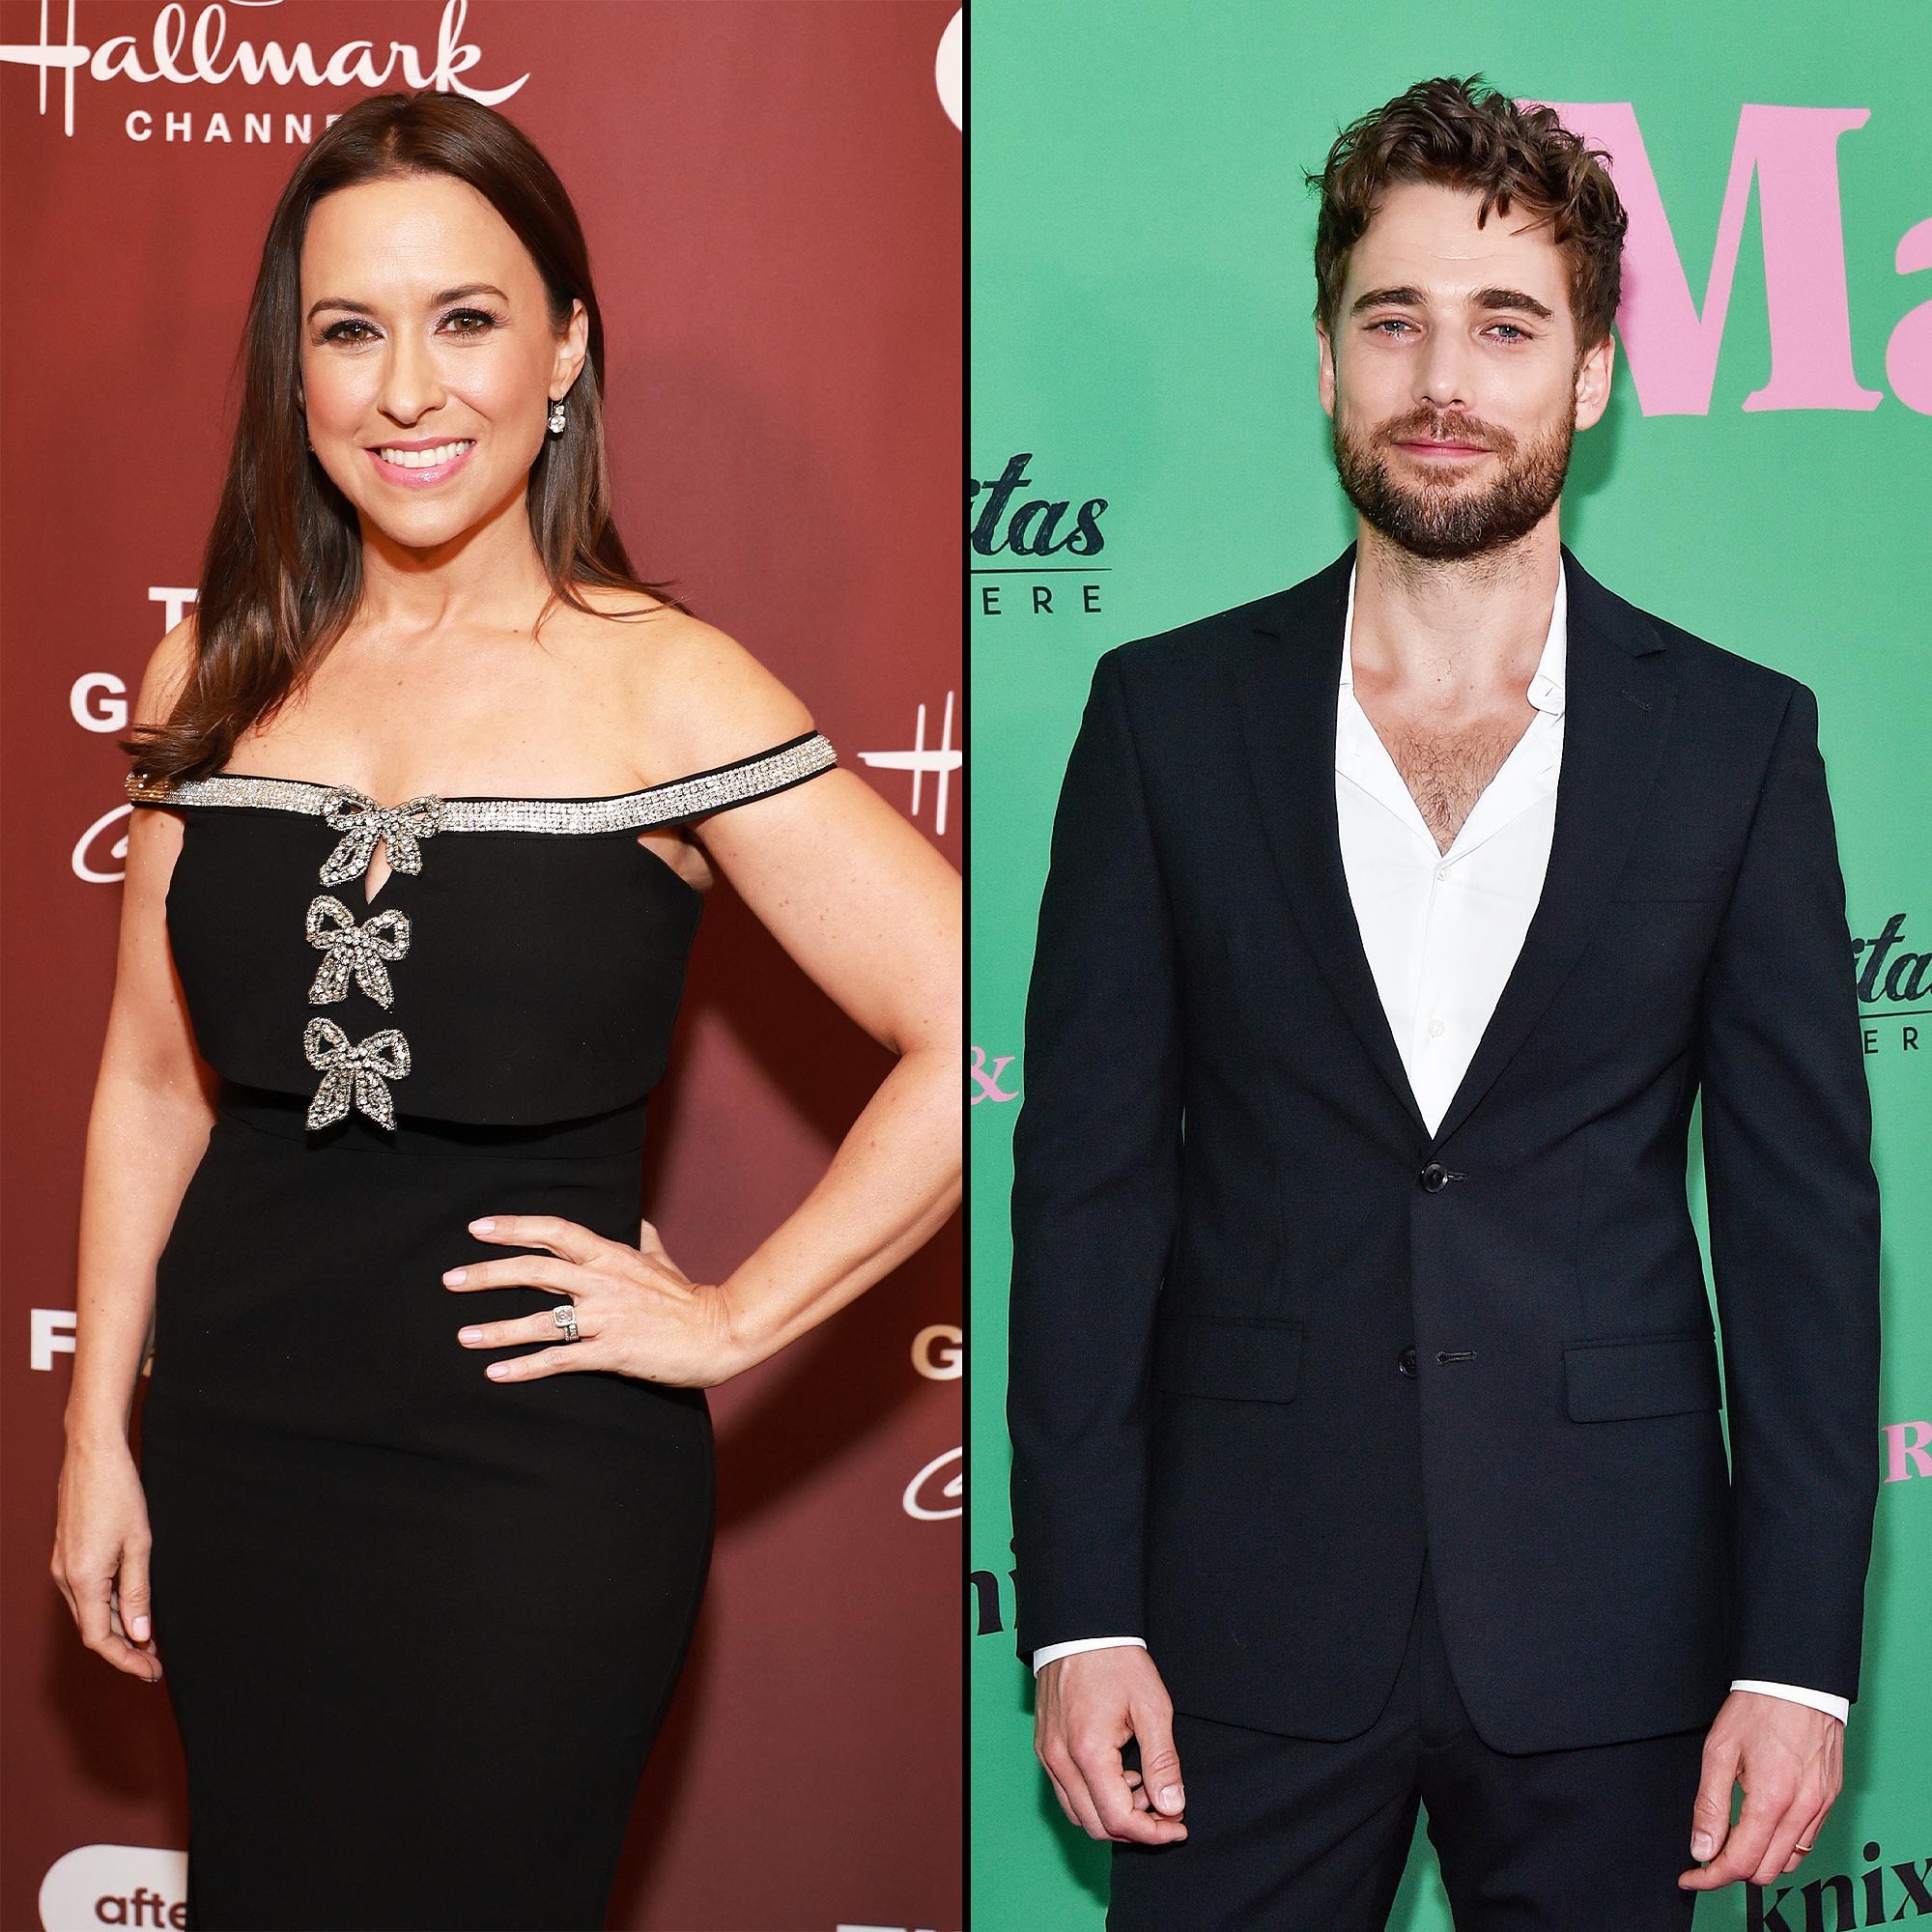 Lacey Chabert Shifts From Hallmark to Netflix for New Holiday Rom-Com ‘Hot Frosty’ With Dustin Milligan